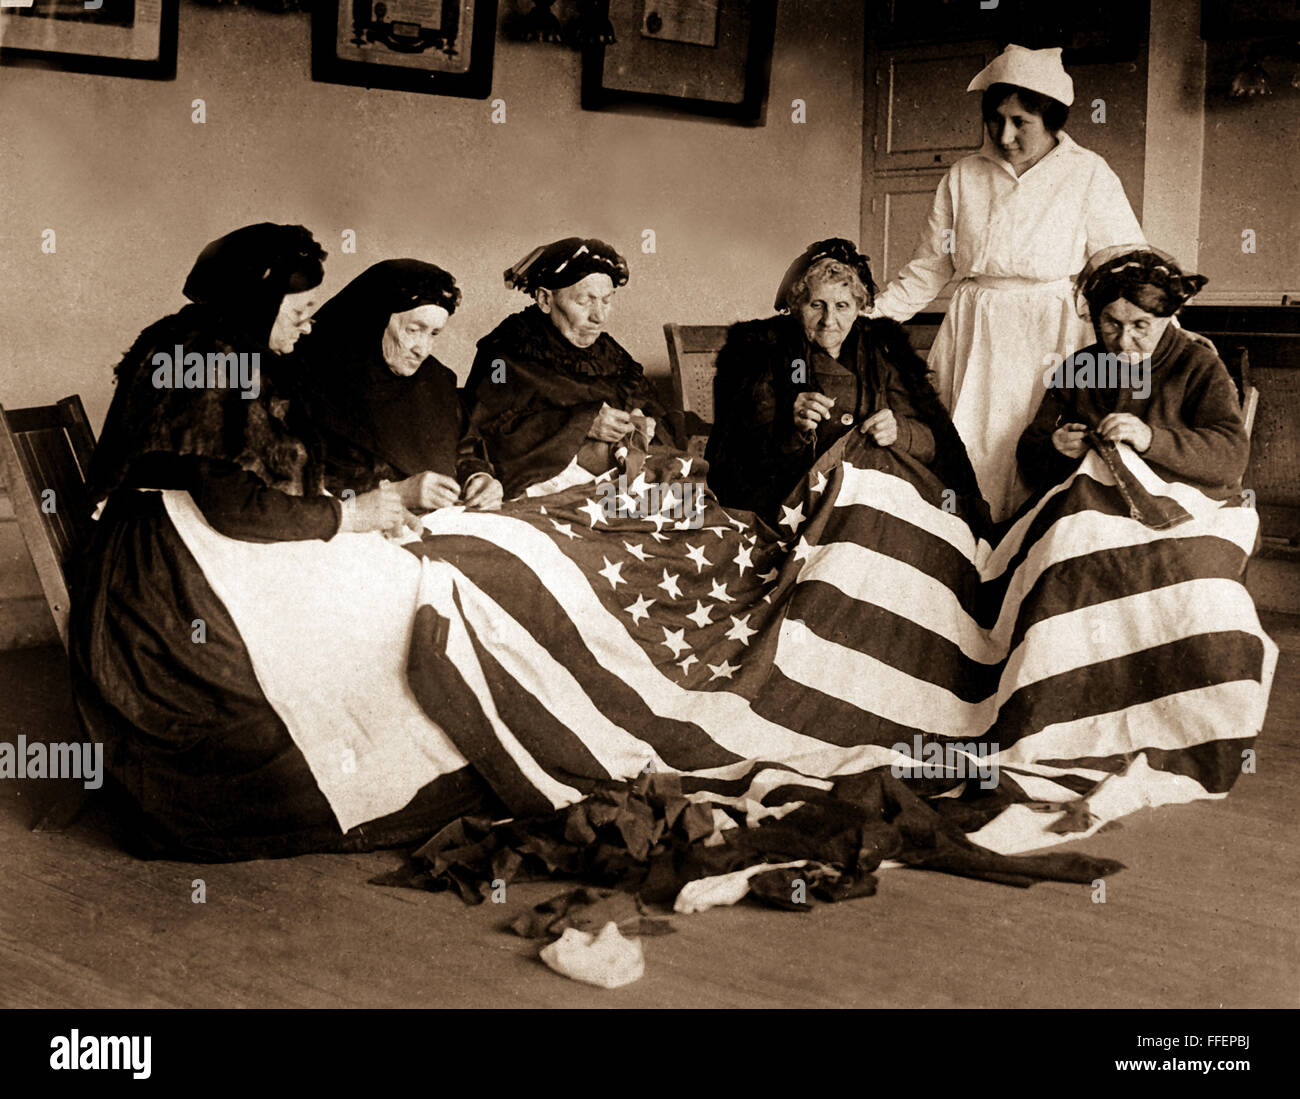 Patriotic old women make flags.  Born in Hungary, Galicia, Russia, Germany, Rumania.  Their flag-making instructor, Rose Radin, is standing.  Ca. 1918.    This archival print is available in the following sizes:    8' x 10'   $15.95 w/ FREE SHIPPING  11' x 14' $23.95 w/ FREE SHIPPING  16' x 20' $59.95 w/ FREE SHIPPING  20' x 24' $99.95 w/ FREE SHIPPING    * The American Photoarchive watermark will not appear on your print. Stock Photo